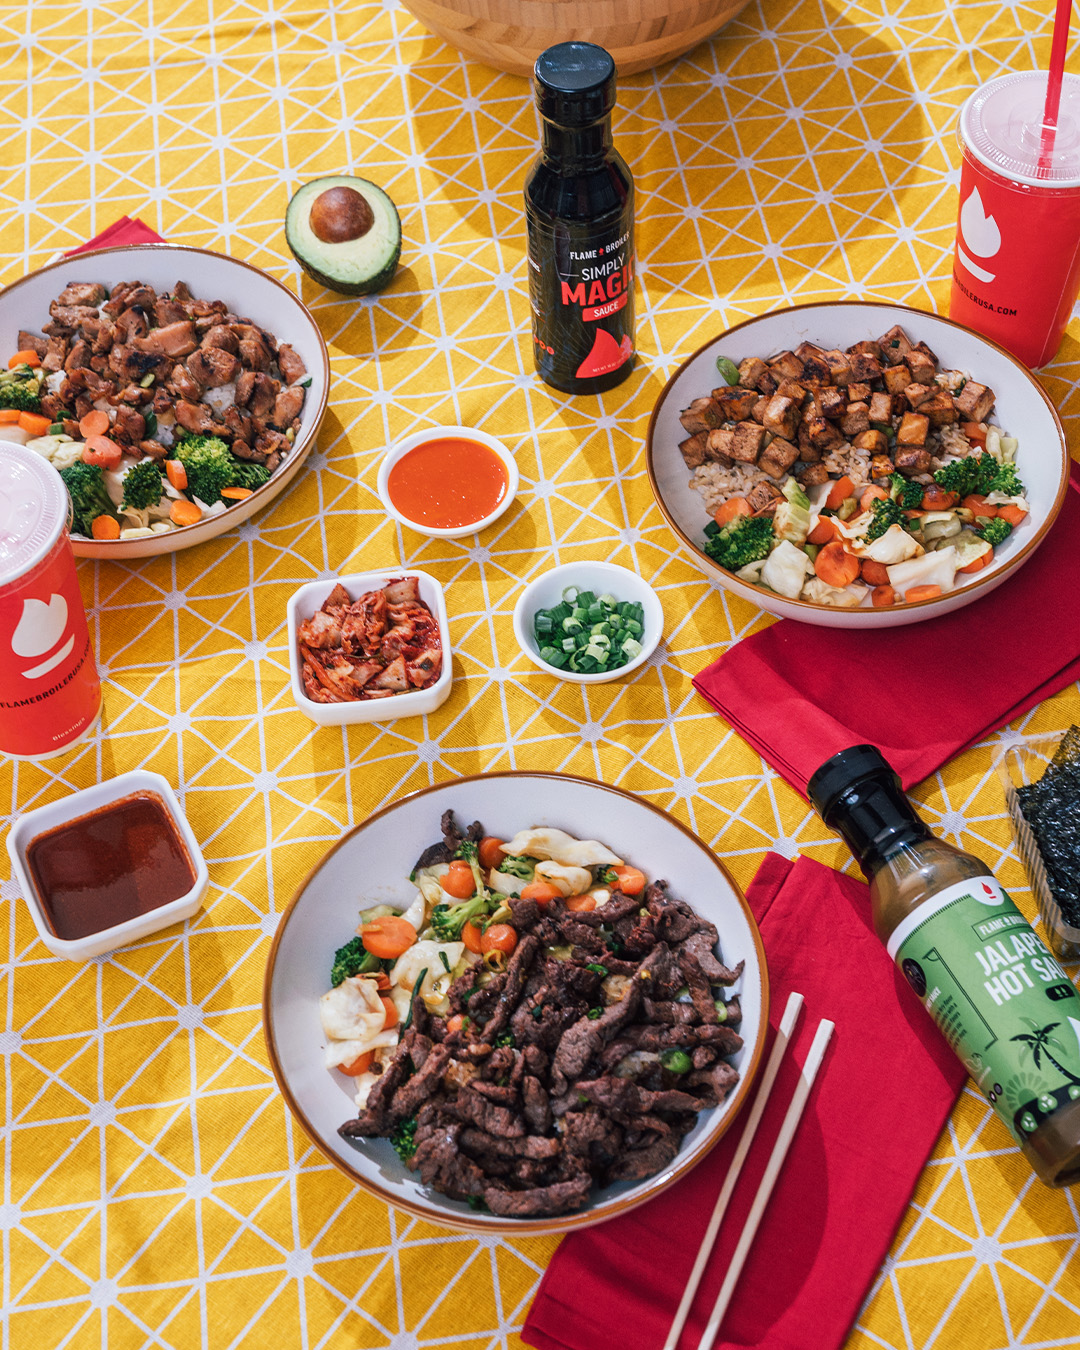 rice bowls with meat and vegetables, scallions, kimchi, chopsticks, sauces and drinks on a table with a yellow tablecloth at a the flame broiler fundraiser